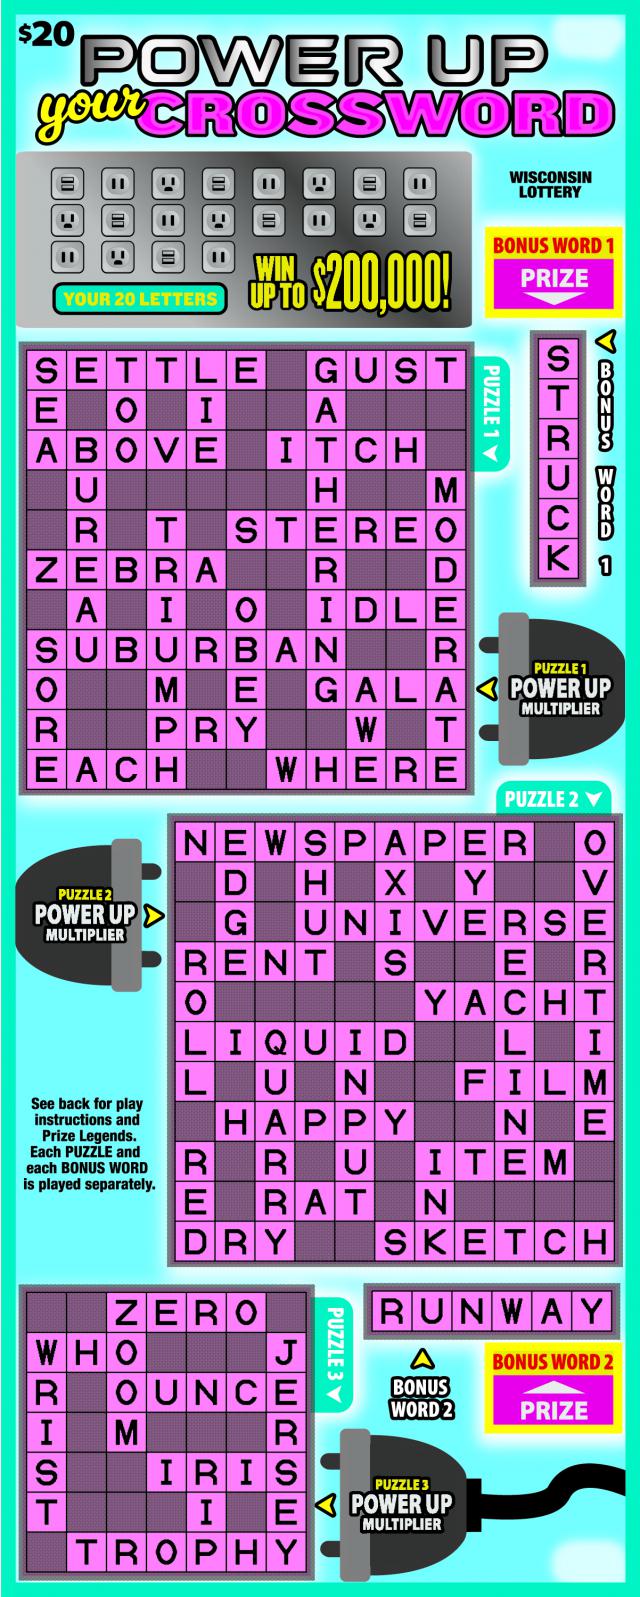 WI-Lottery-2131-Scratch-Game-Power-Up-Your-Crossword